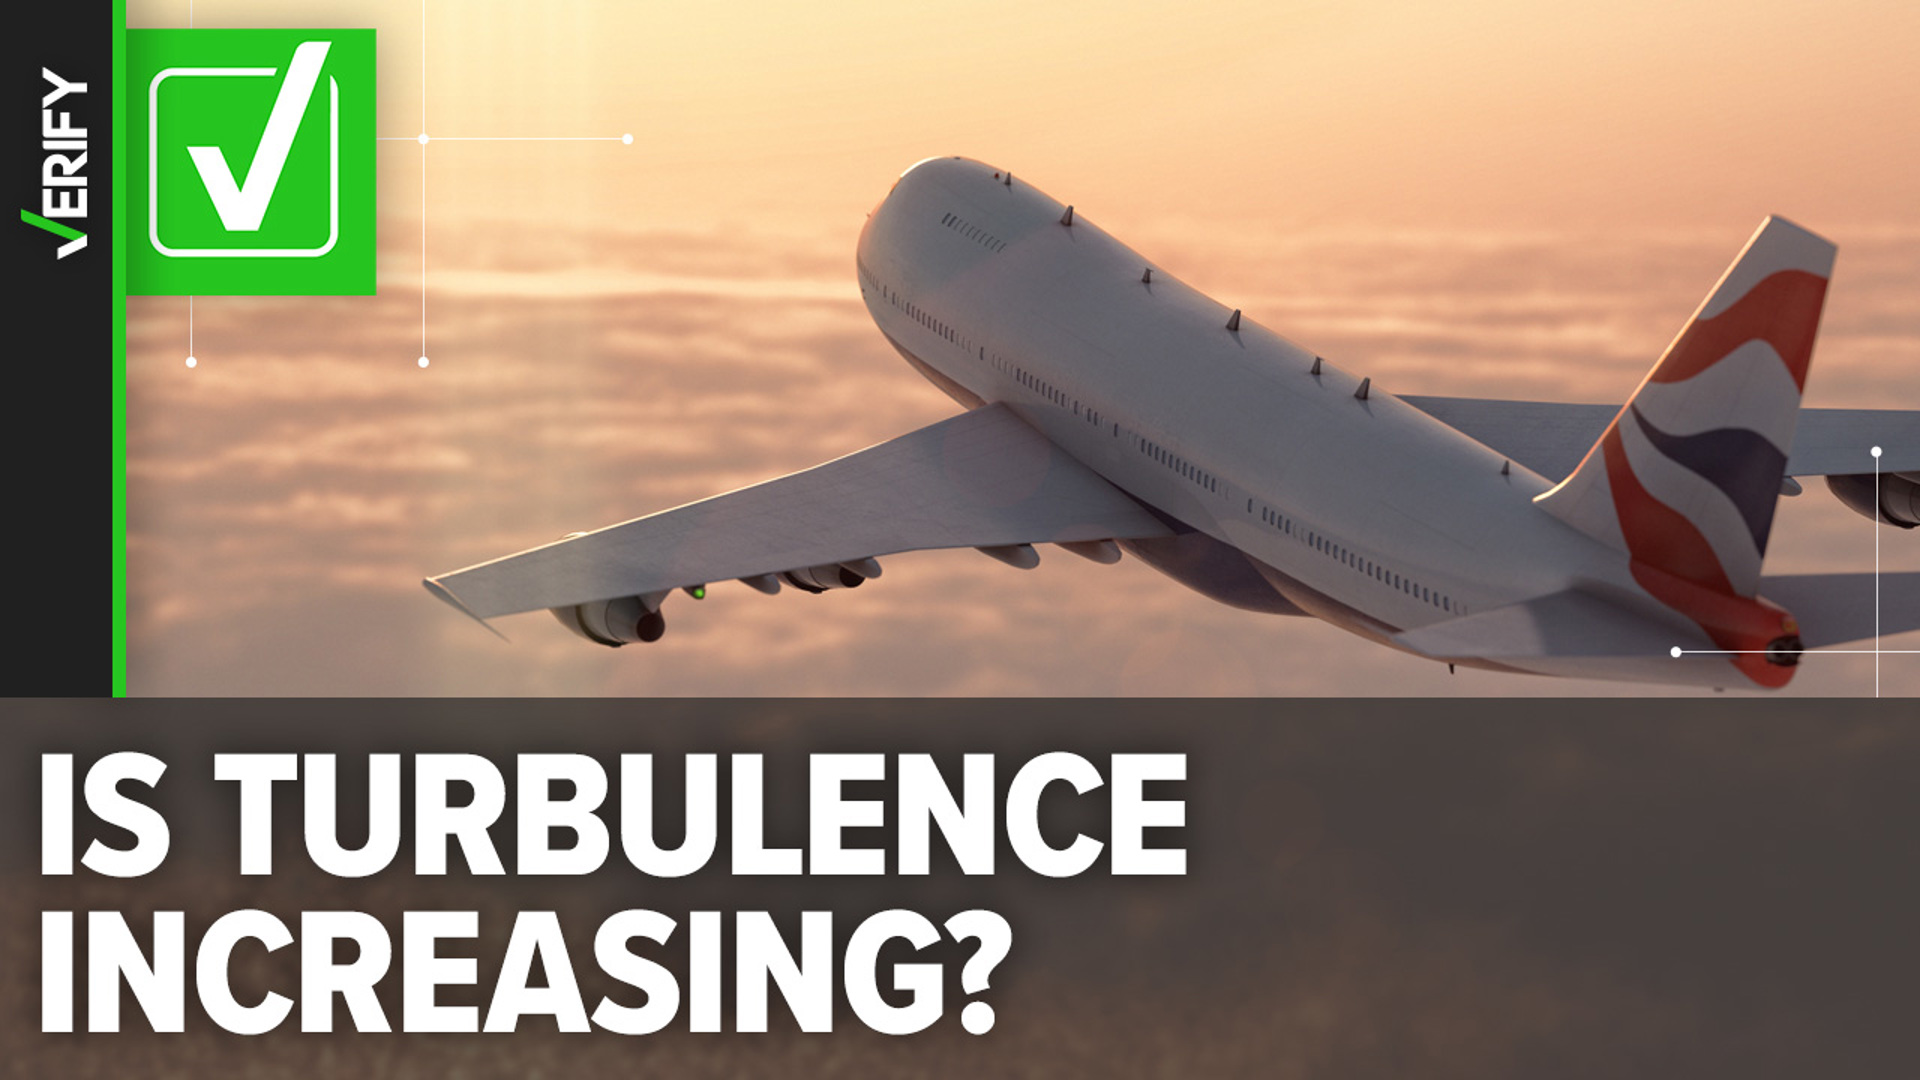 As more people take their vacations, some are claiming they're encountering more turbulence, but is that actually happening?